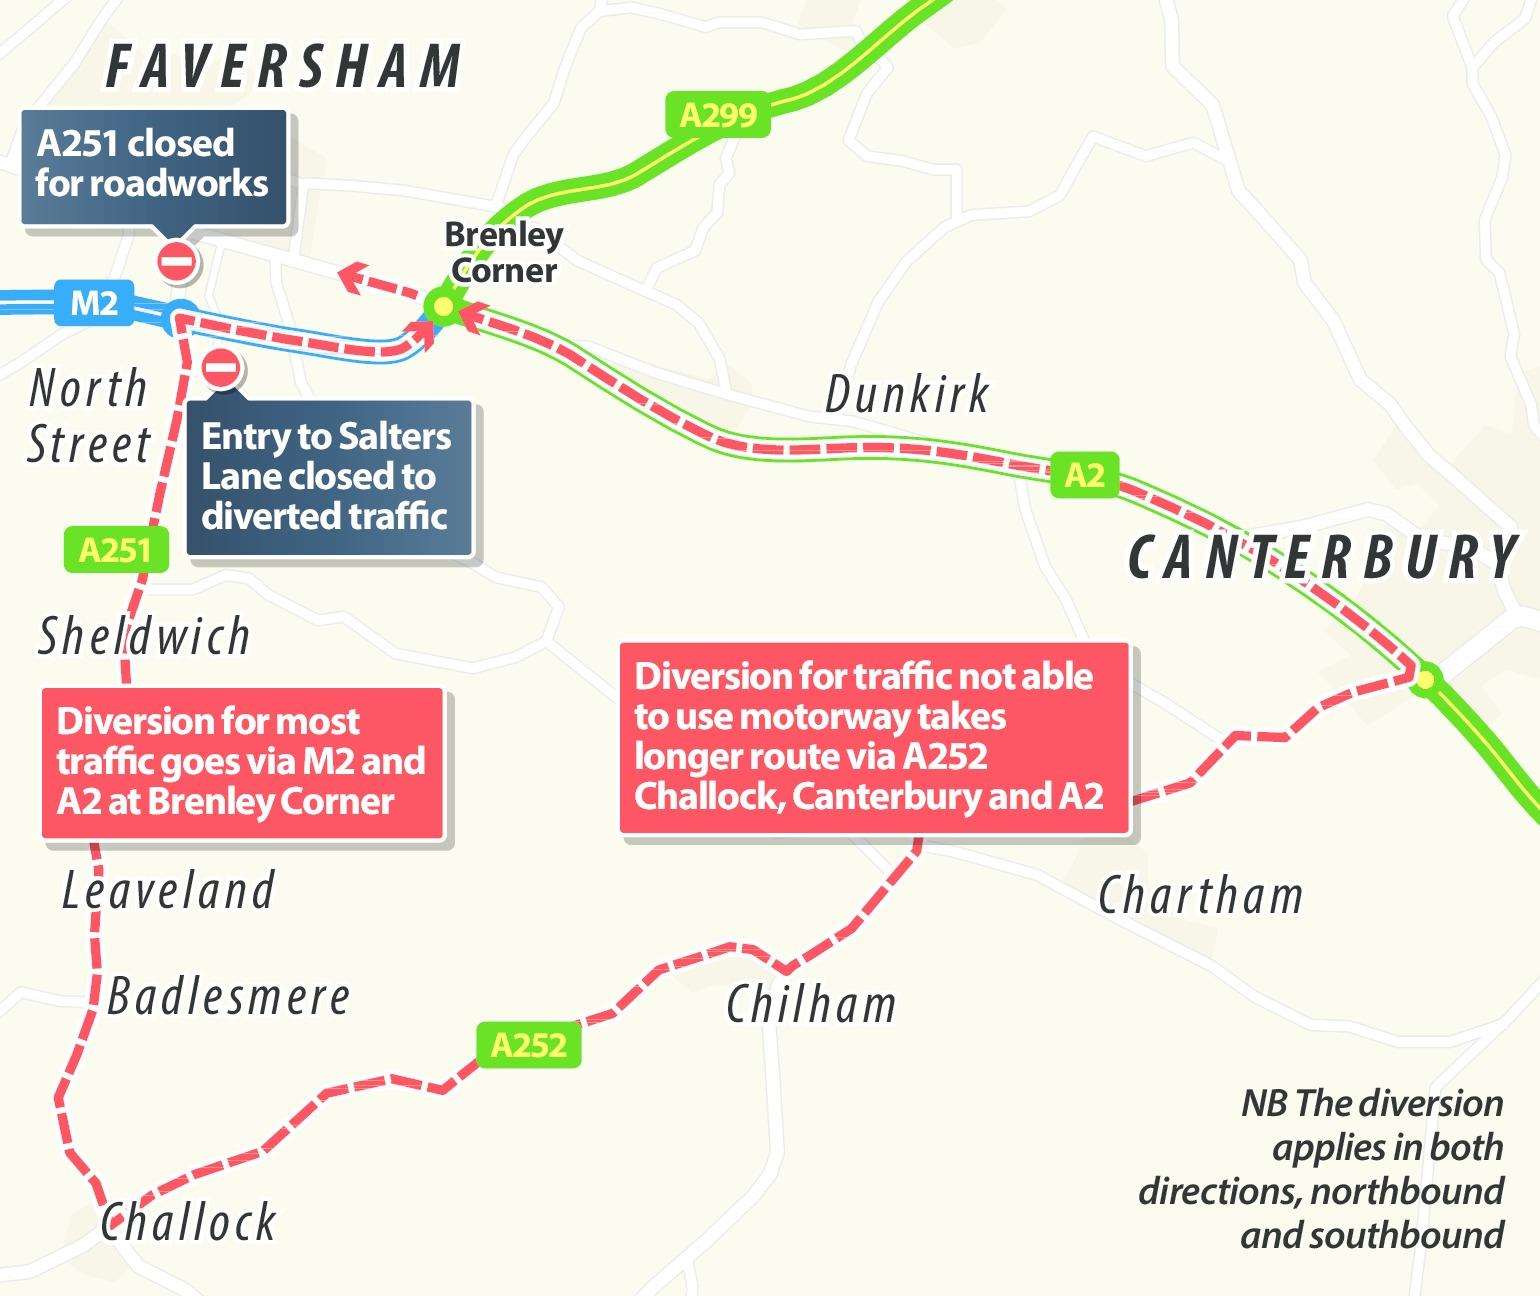 The proposed non-motorway diversion